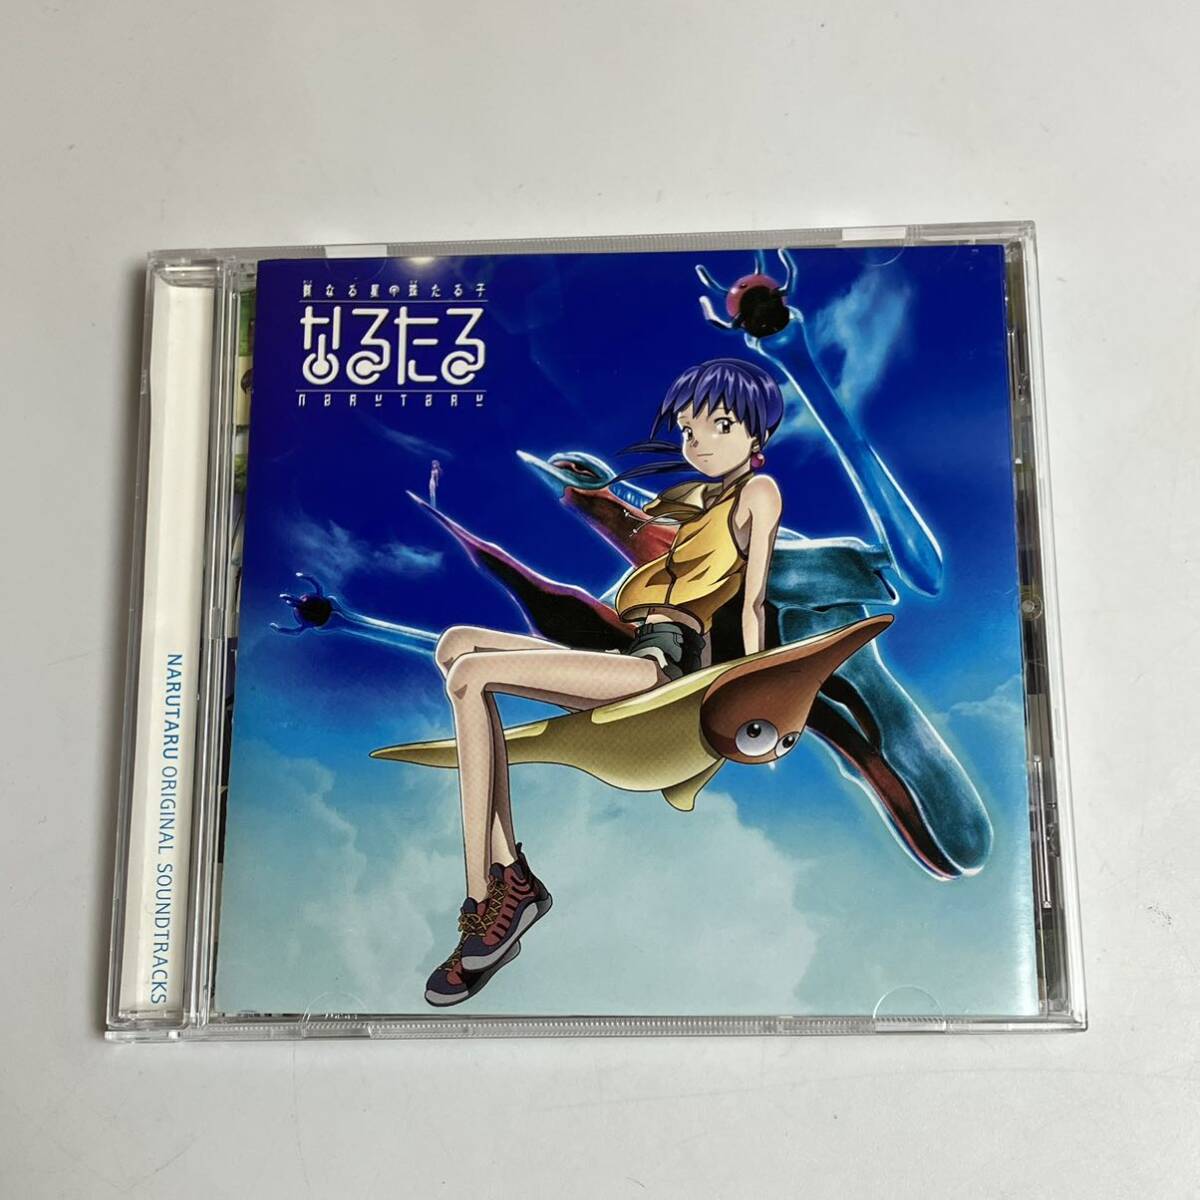  rare!! anime CD. become star .... become .. original soundtrack MUCD-1097 ultra rare popular records out of production out of print do Lee music 